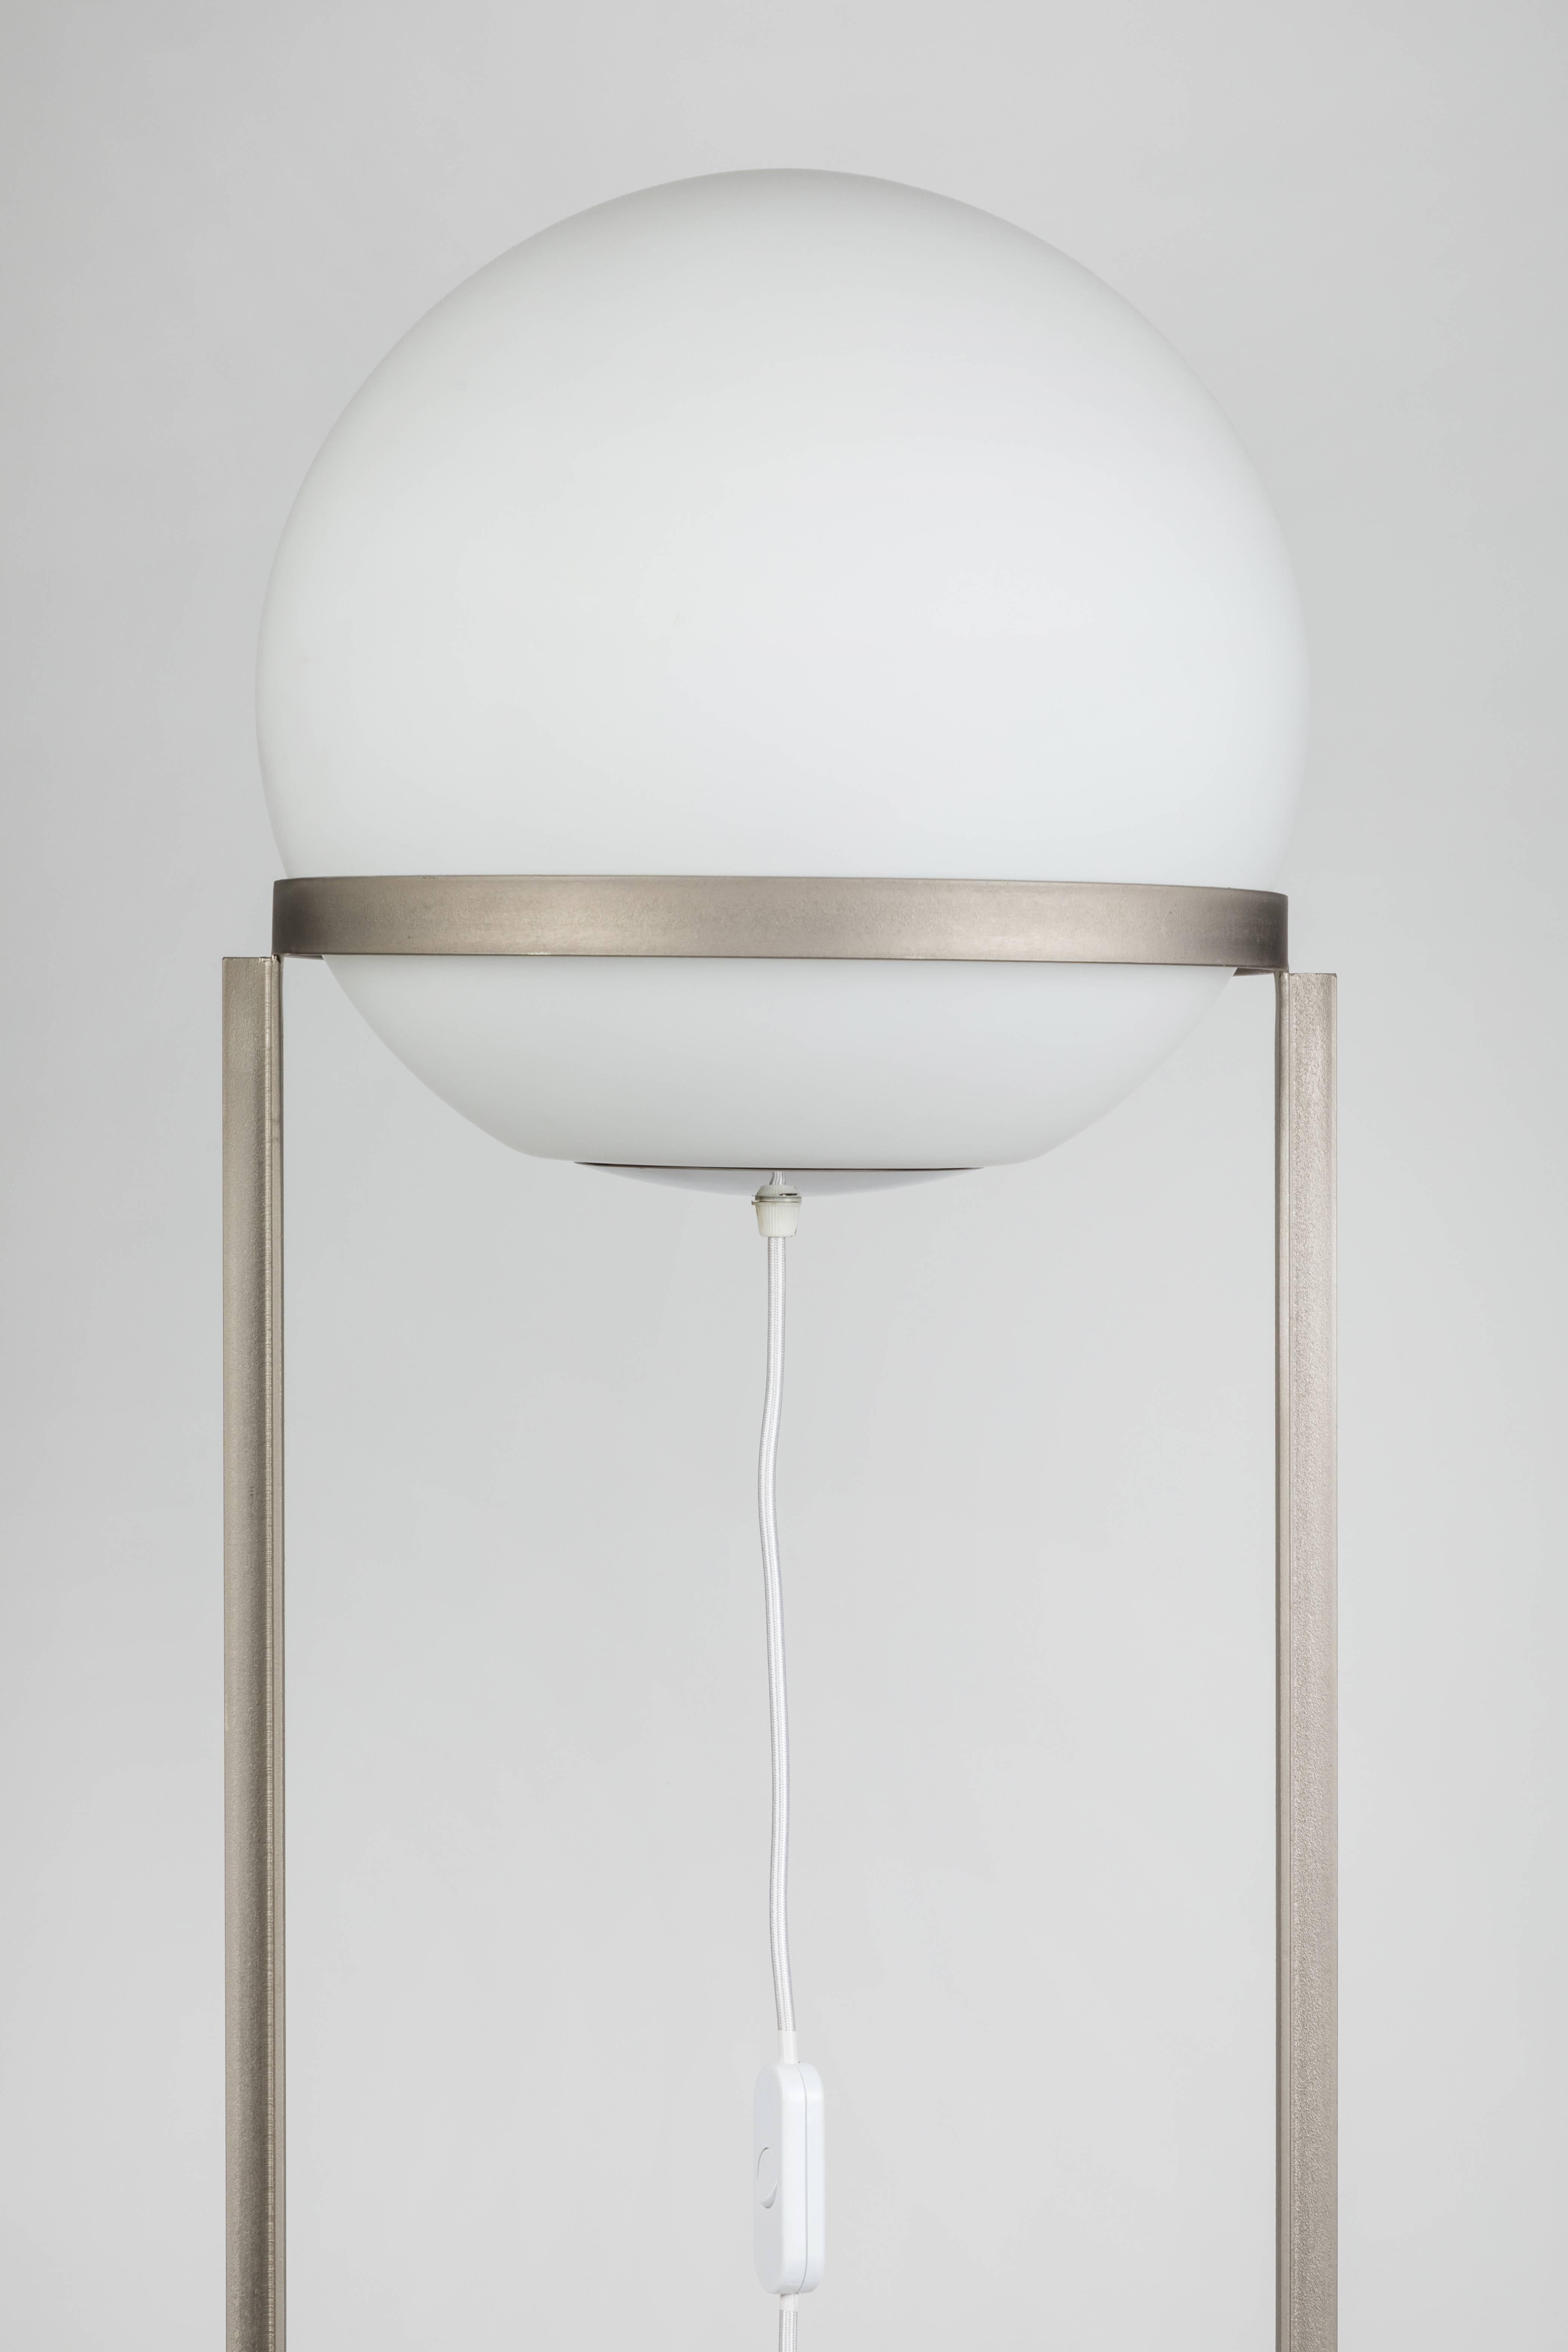 Limited Edition Carl Auböck Model 4095 Floor Lamp For Sale at 1stDibs